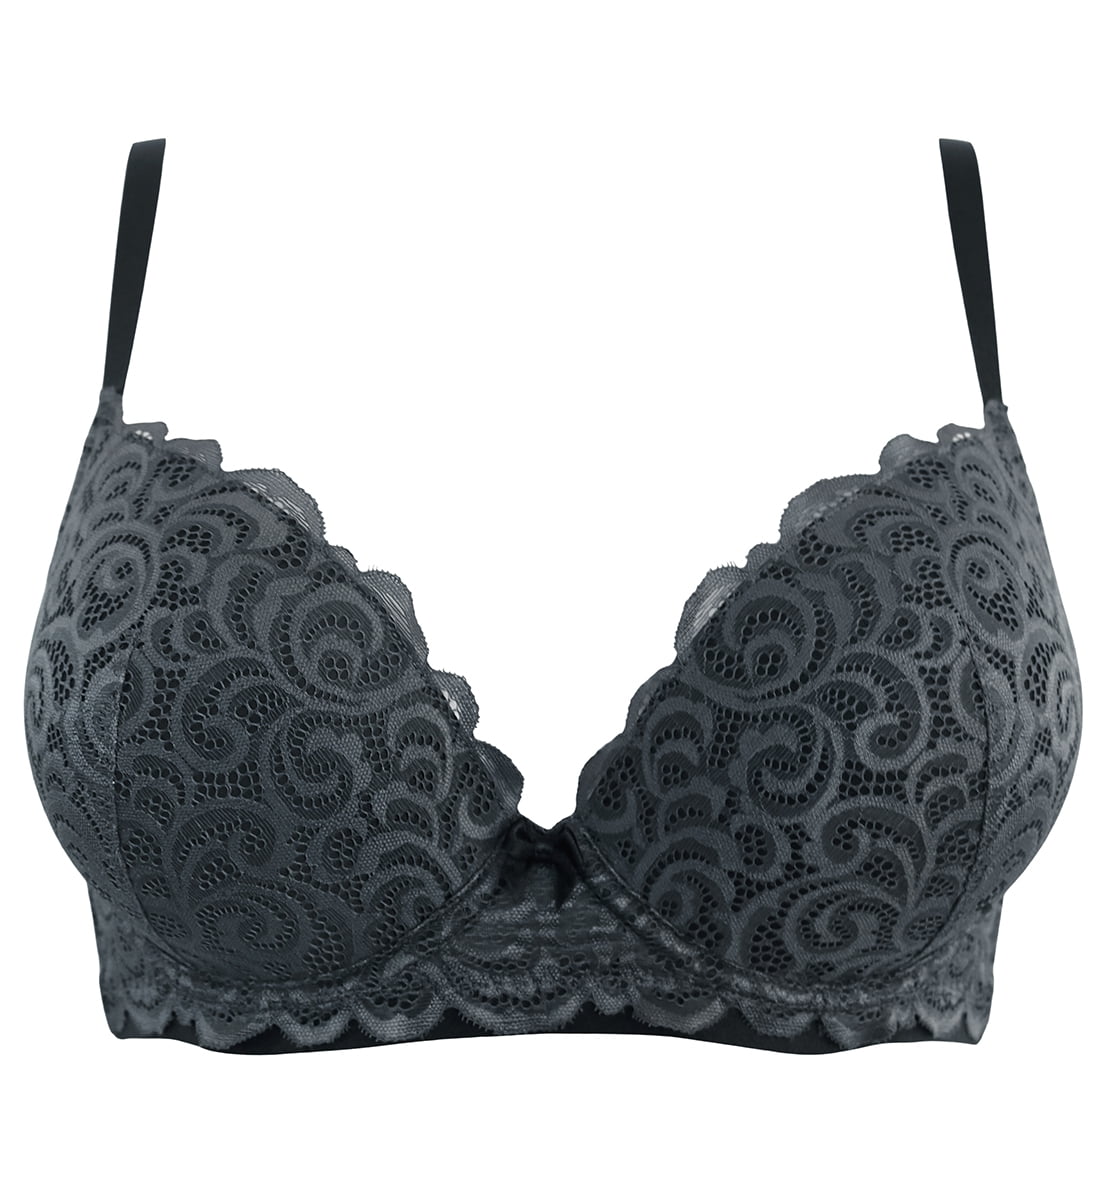 Black 42 H / 42H Underwire Molded Cup Lace Accents Balconette Bra ADORE ME  on eBid United States